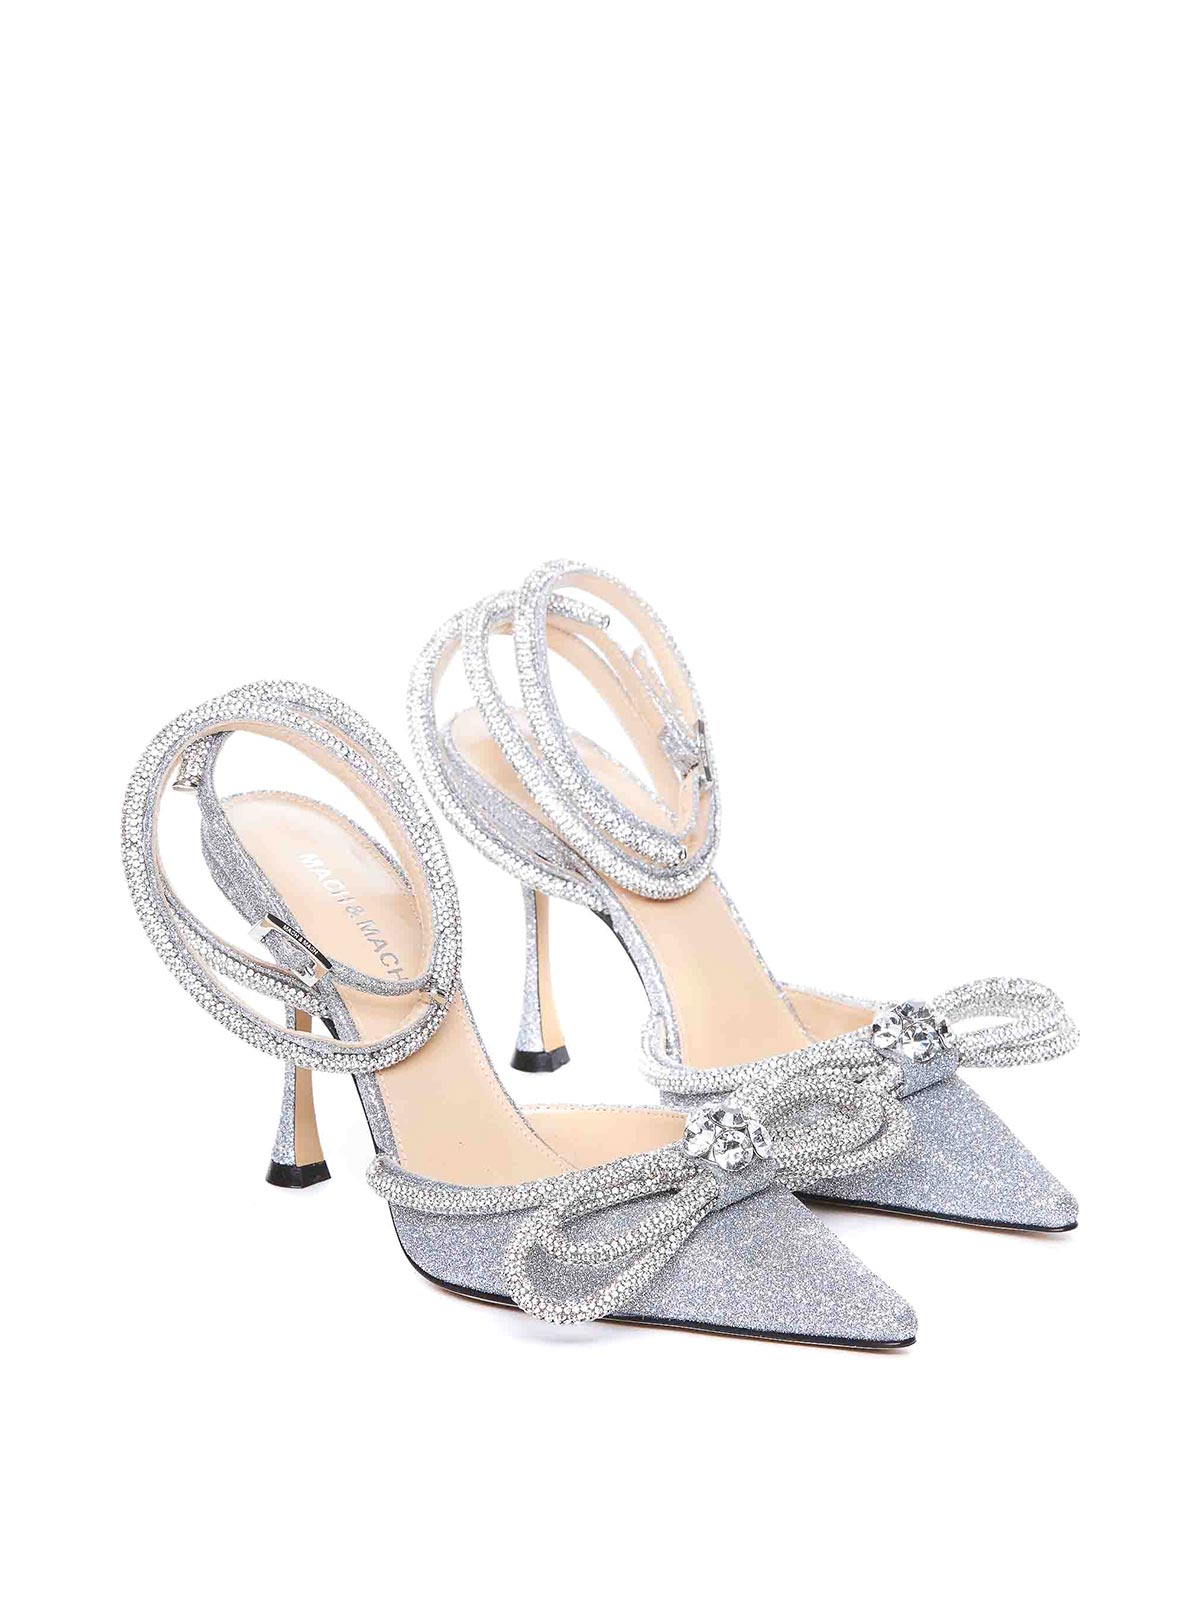 Shop Mach & Mach Pumps Sandals All Over Bow In Silver